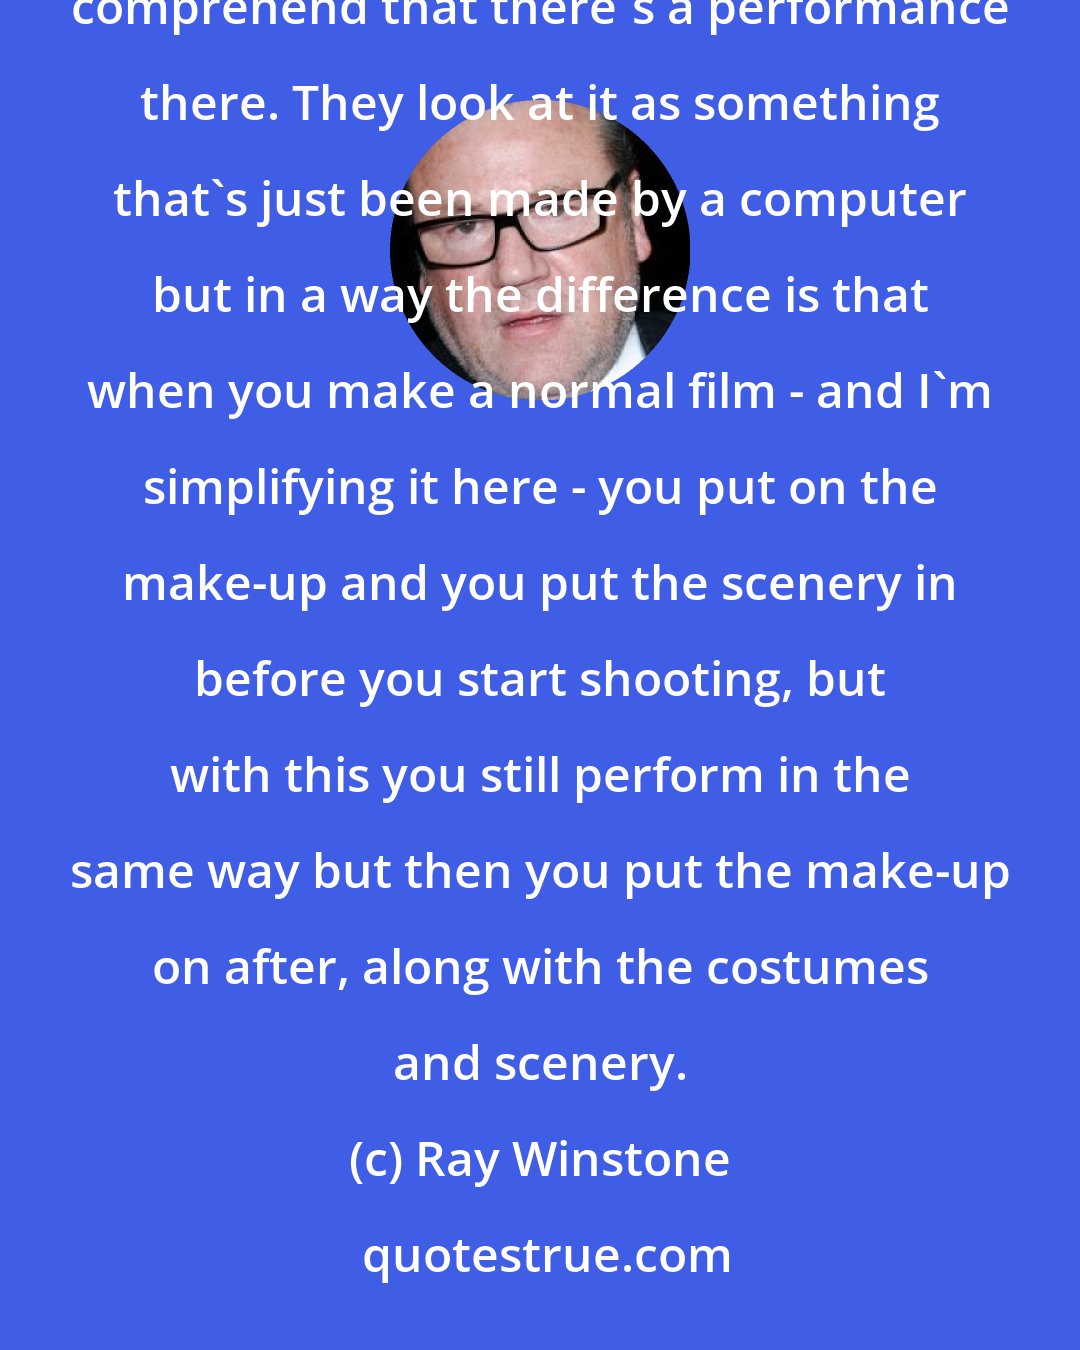 Ray Winstone: The other thing is that when people mention computers - and I'm pretty much the same - they find it hard to comprehend that there's a performance there. They look at it as something that's just been made by a computer but in a way the difference is that when you make a normal film - and I'm simplifying it here - you put on the make-up and you put the scenery in before you start shooting, but with this you still perform in the same way but then you put the make-up on after, along with the costumes and scenery.